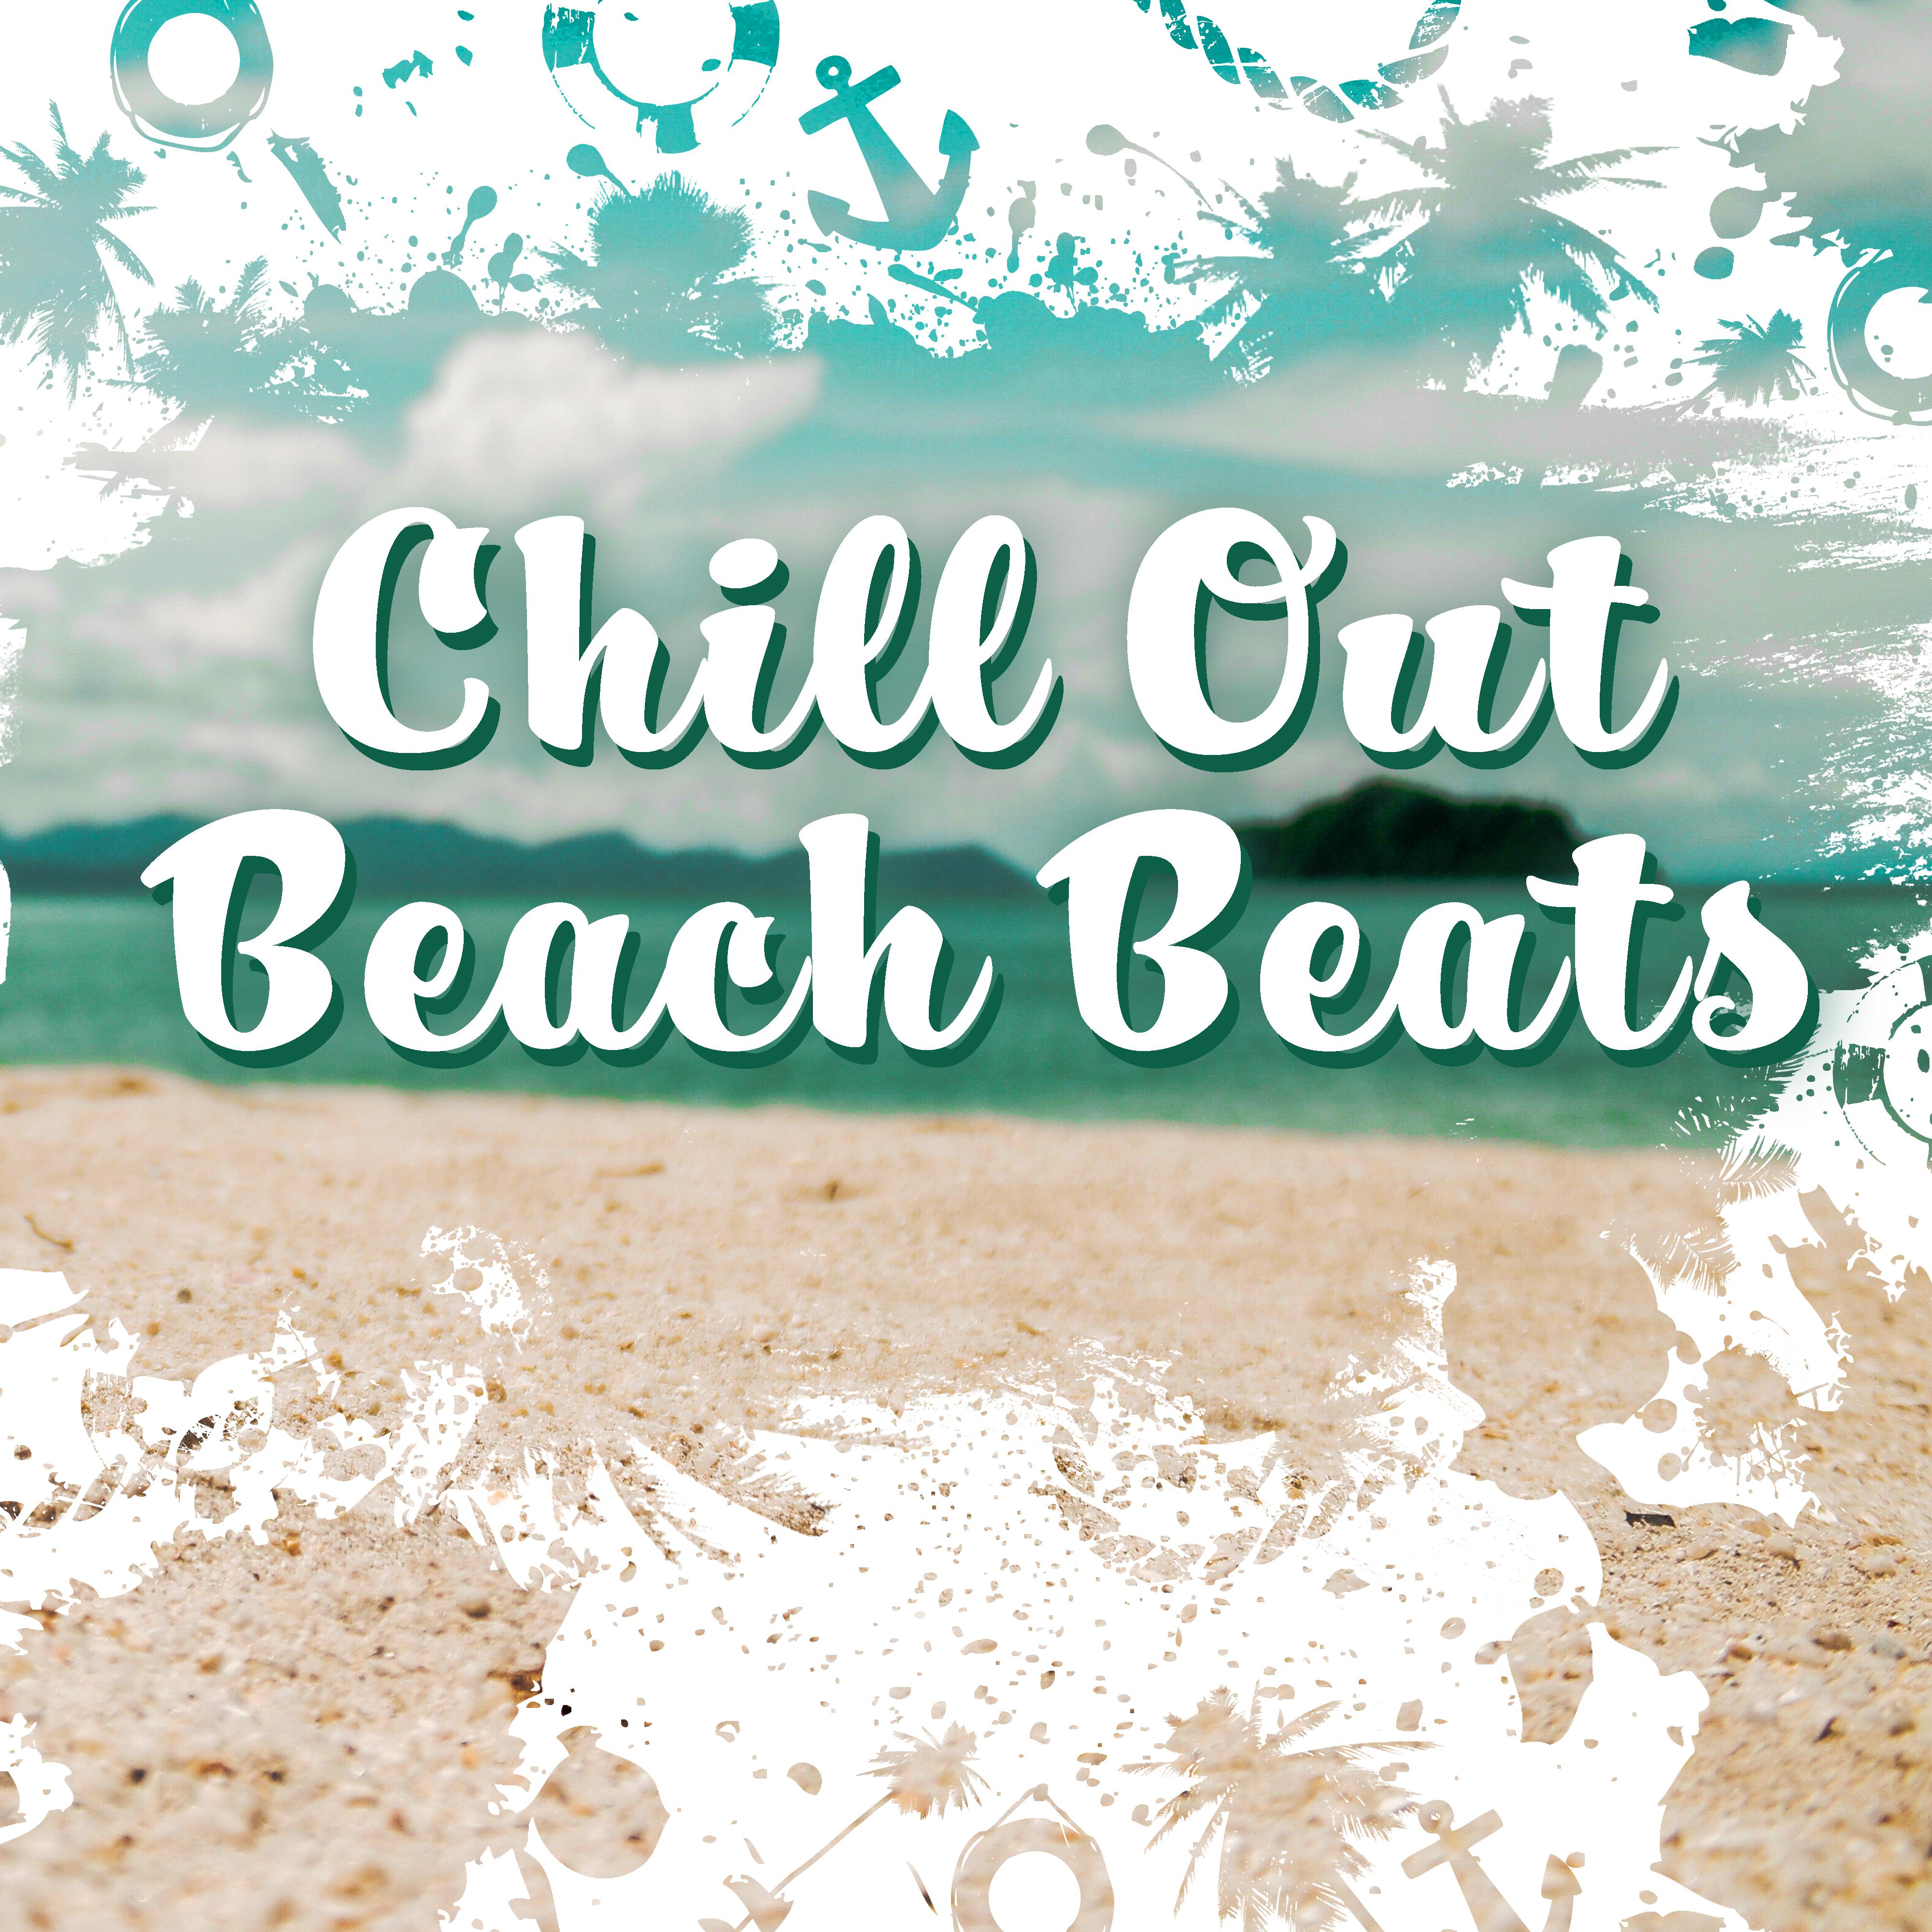 Chill Out Beach Beats  Summer Relaxing Melodies, Stress Relief, Peaceful Music, Time to Rest, 2017 Chill Out Music